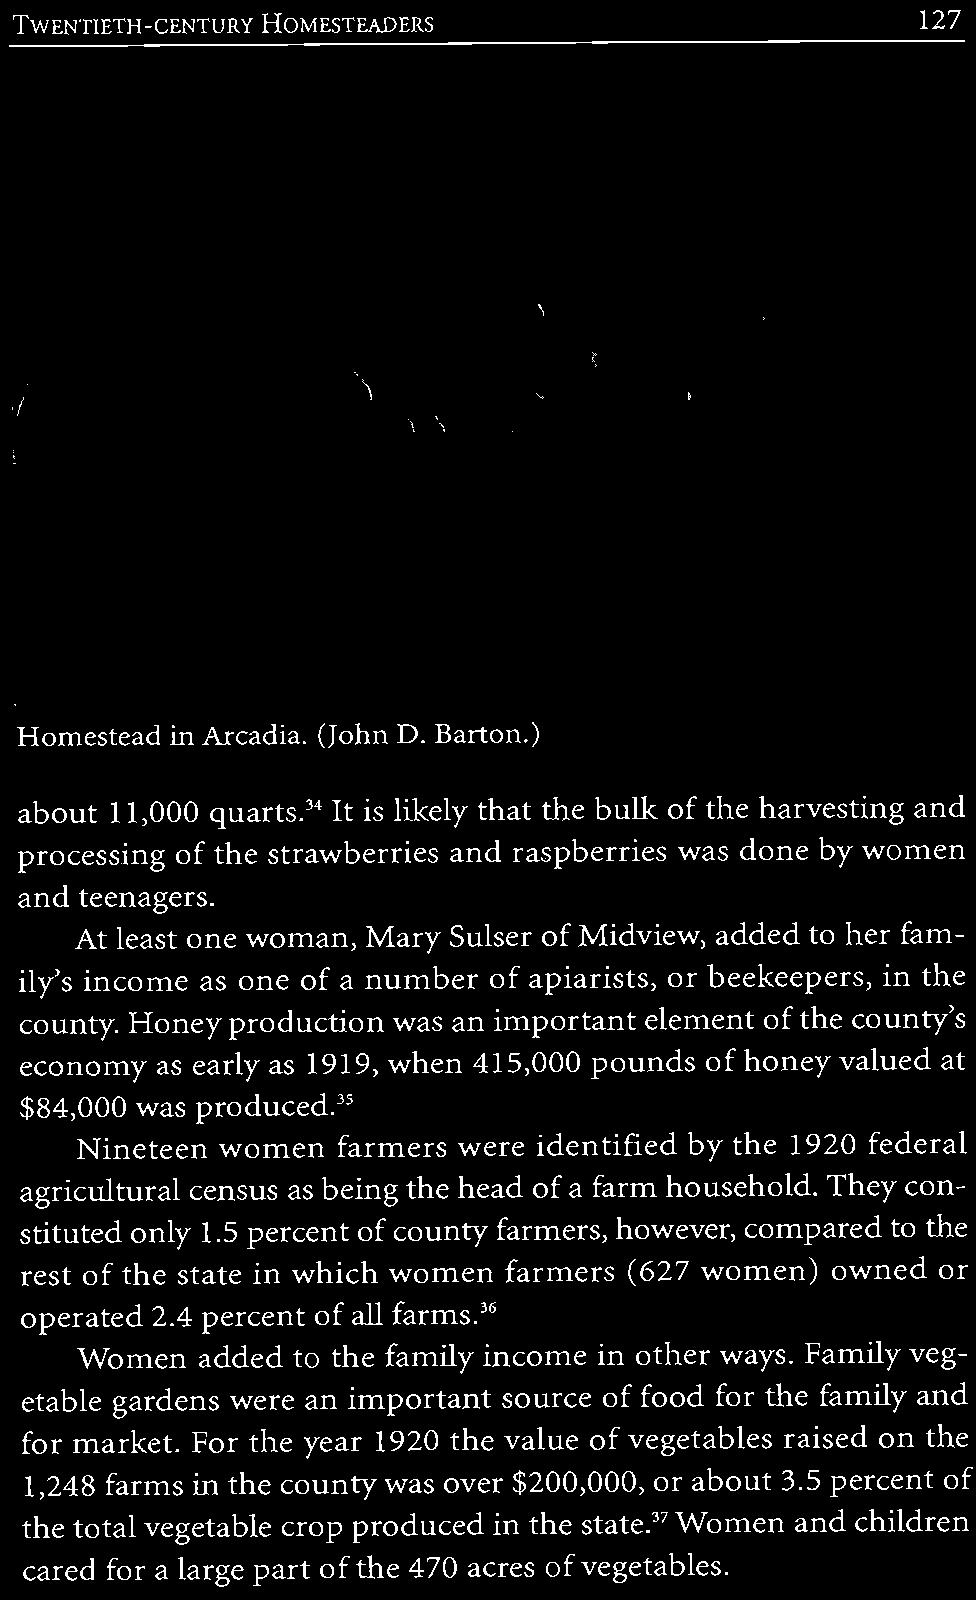 36 Women added to the family income in other ways. Family vegetable gardens were an important source of food for the family and for market.